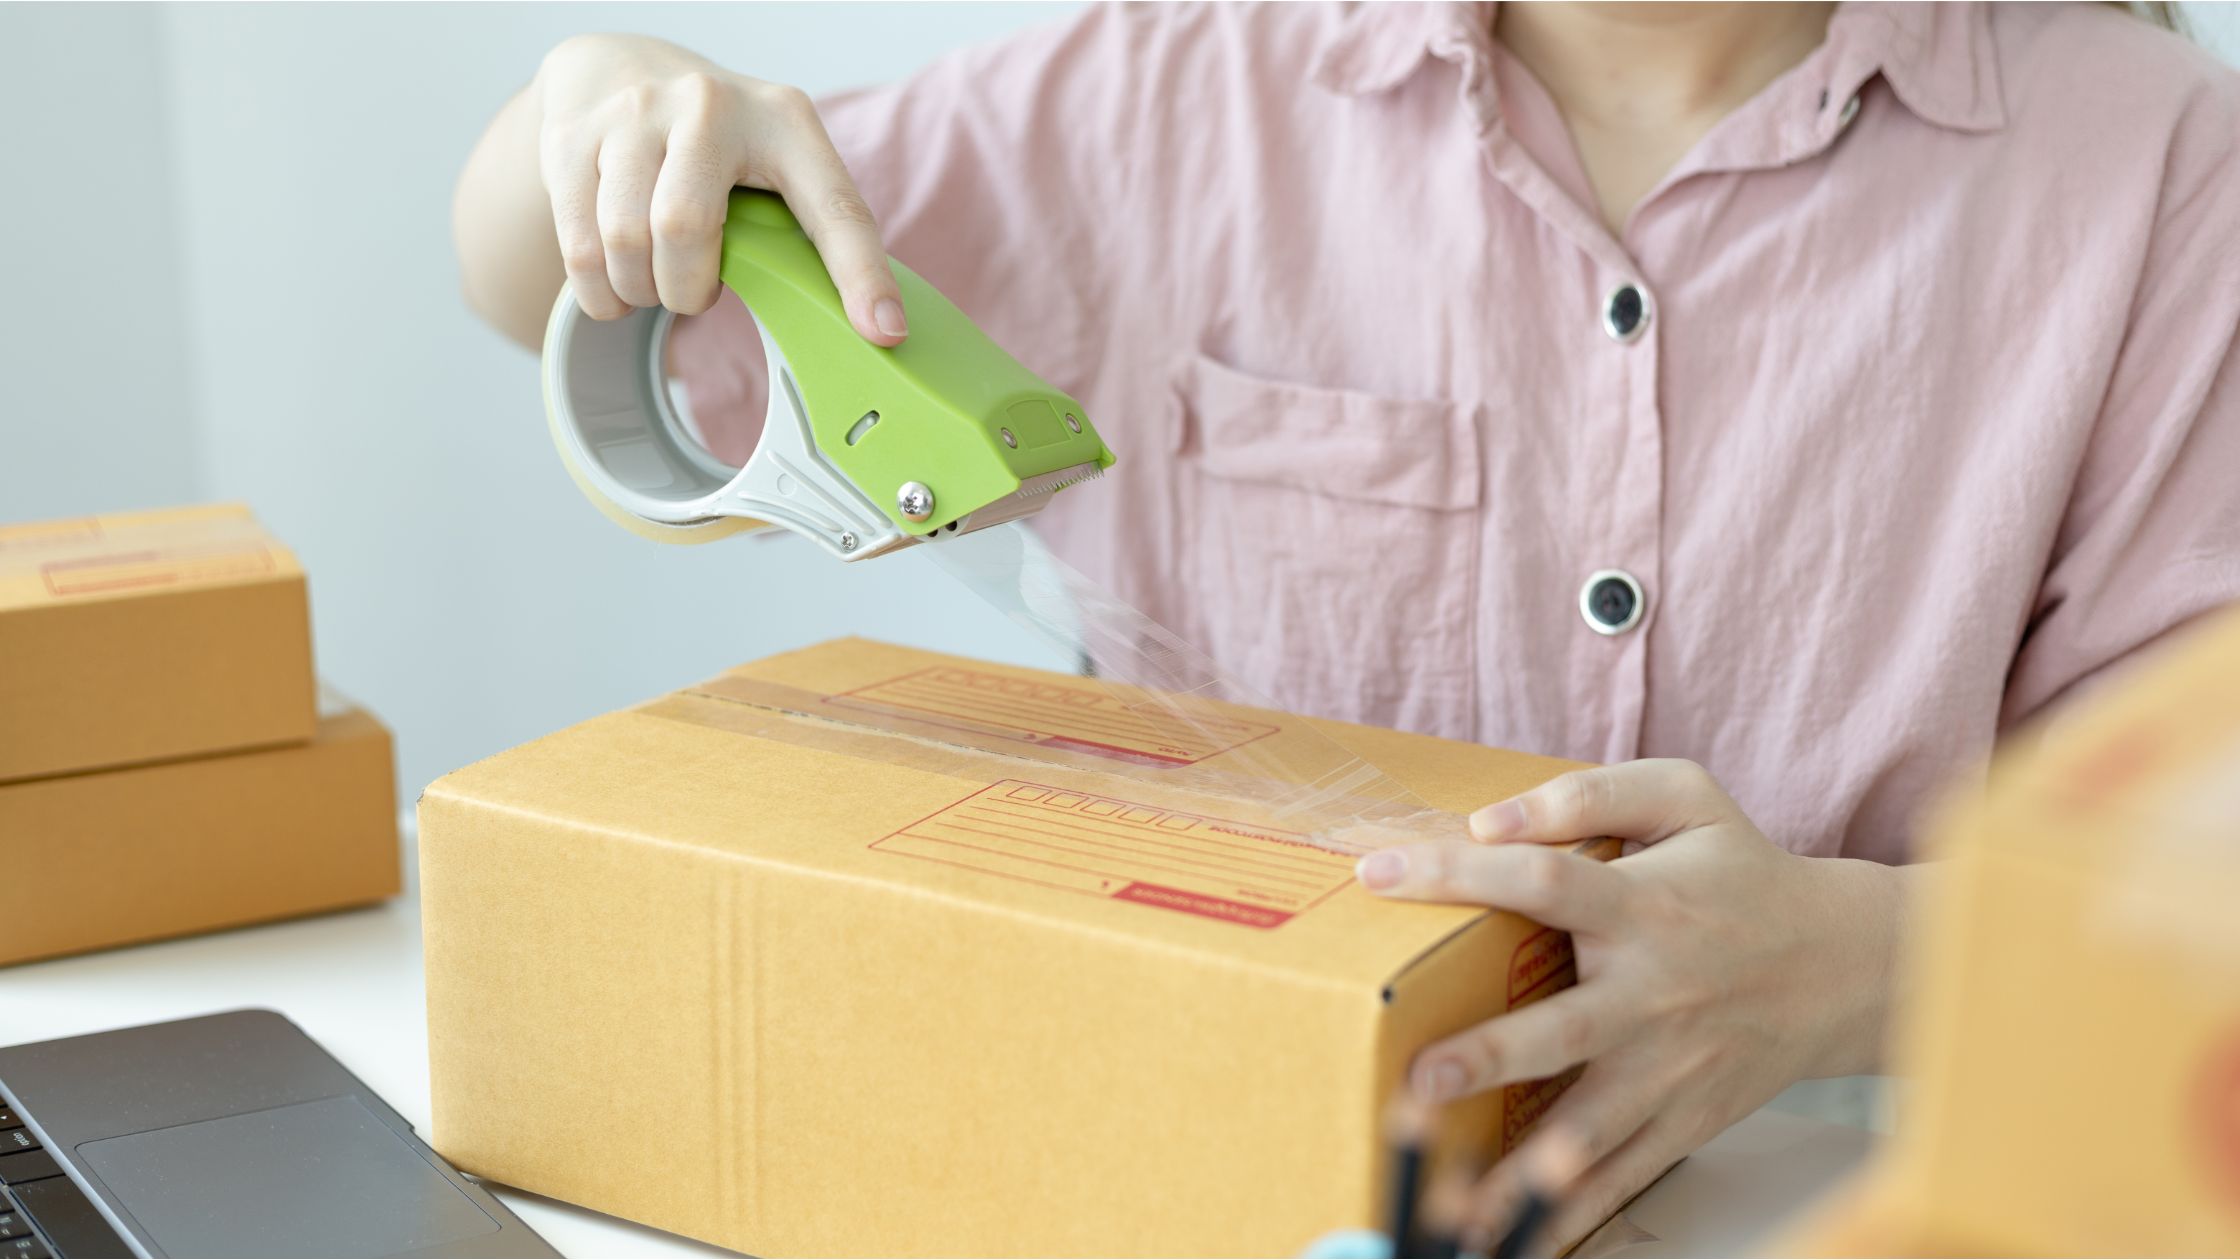 Affordable Shipping Solutions: How to Find High-Quality Shipping Boxes at the Best Price